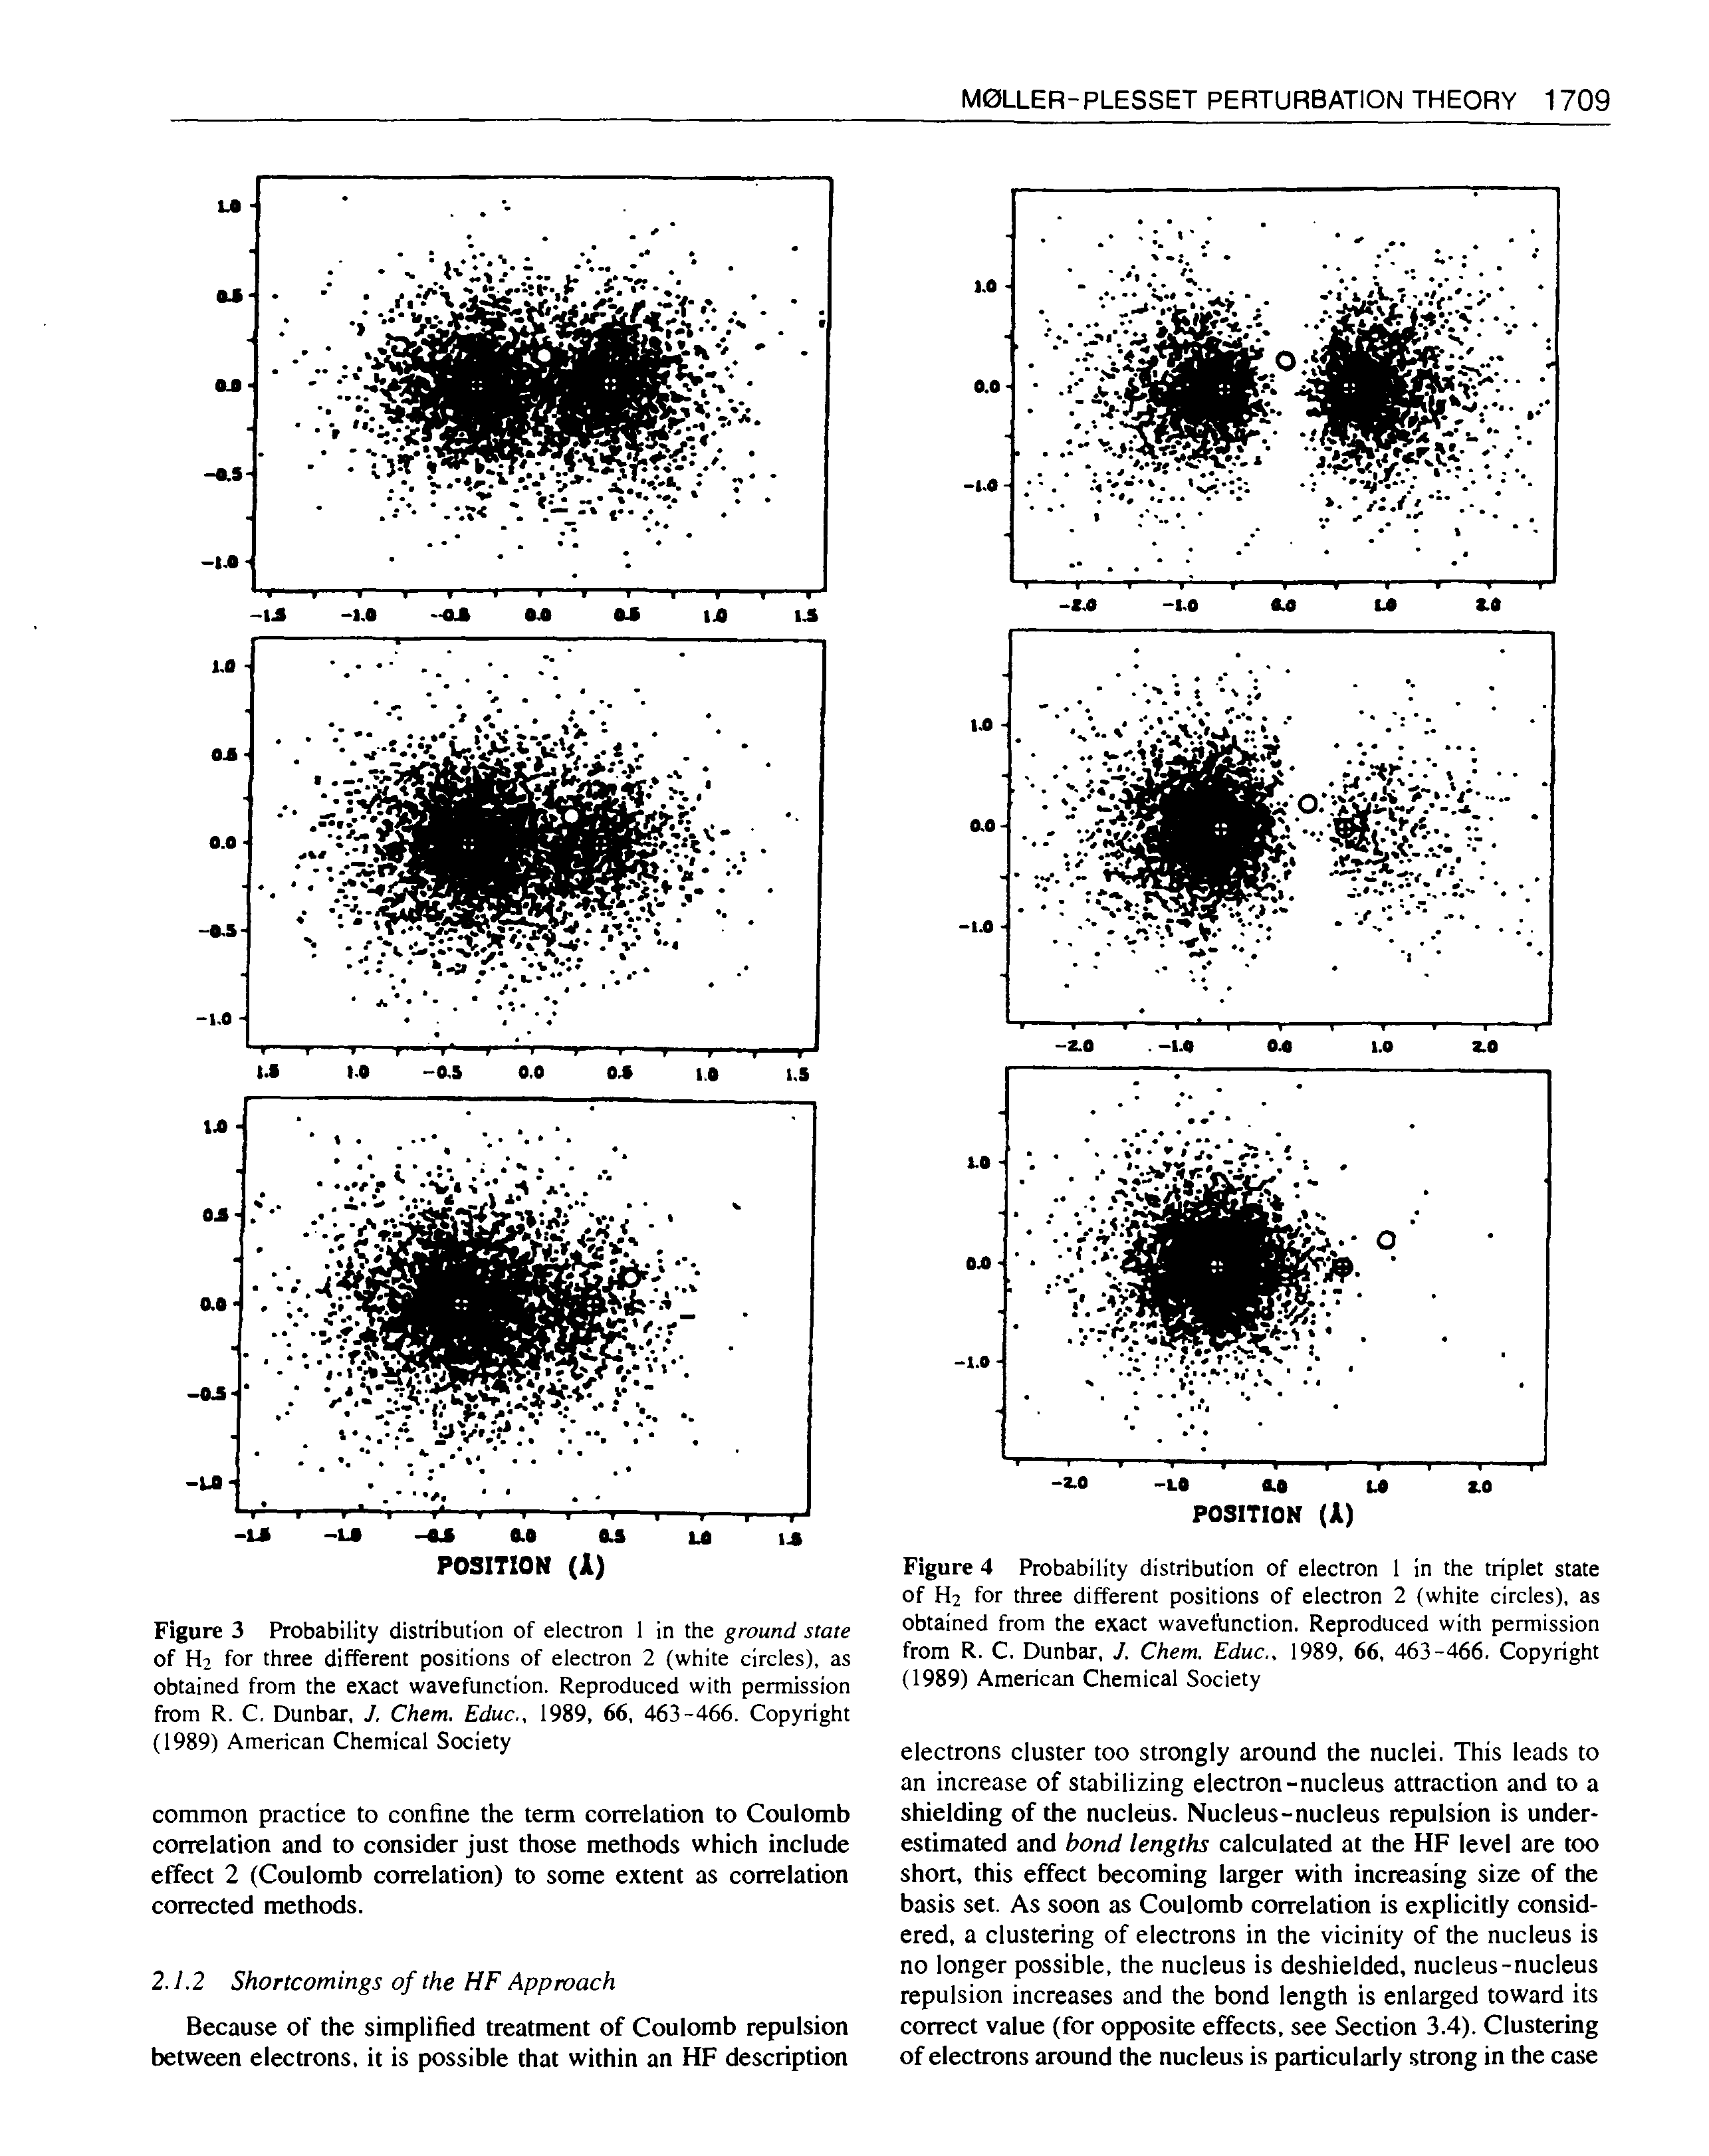 Figure 3 Probability distribution of electron 1 in the ground state of H2 for three different positions of electron 2 (white circles), as obtained from the exact wavefunction. Reproduced with permission from R. C, Dunbar, J, Chem. Educ., 1989, 66, 463-466. Copyright (1989) American Chemical Society...